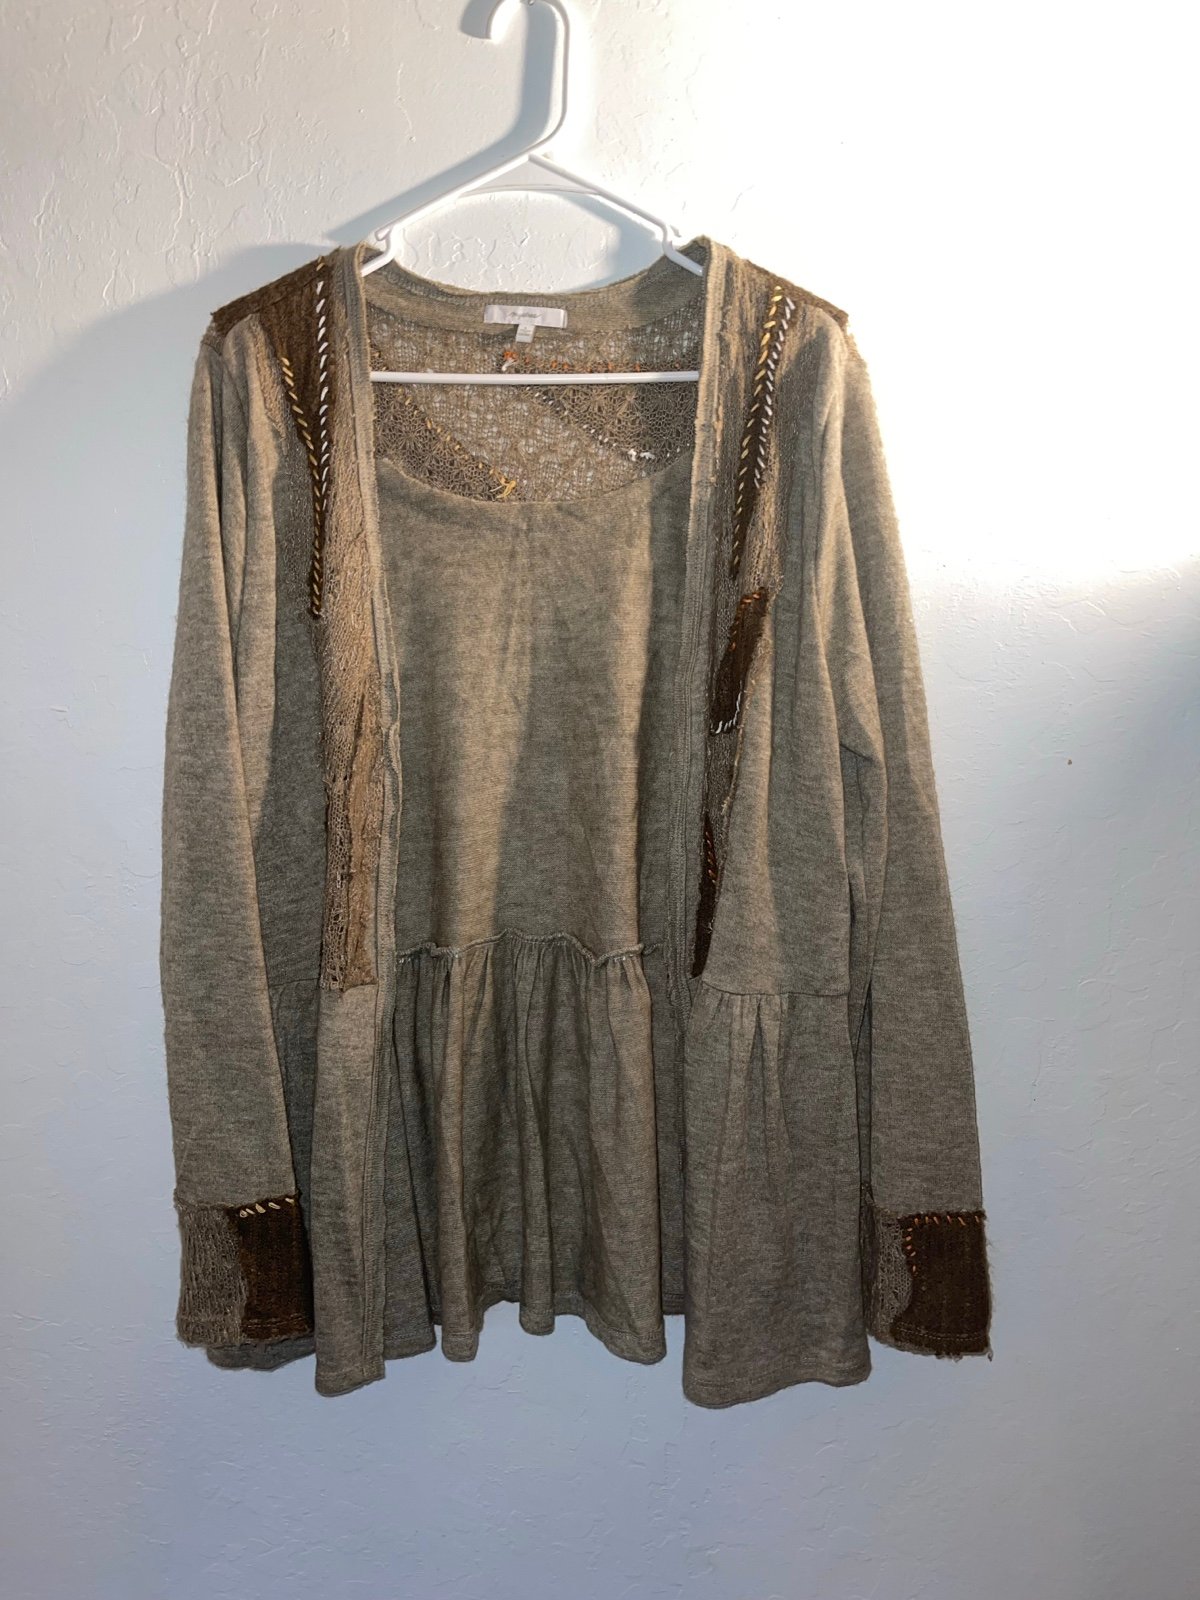 High quality Women’s mystree cardigan size large GPevei9vo just for you